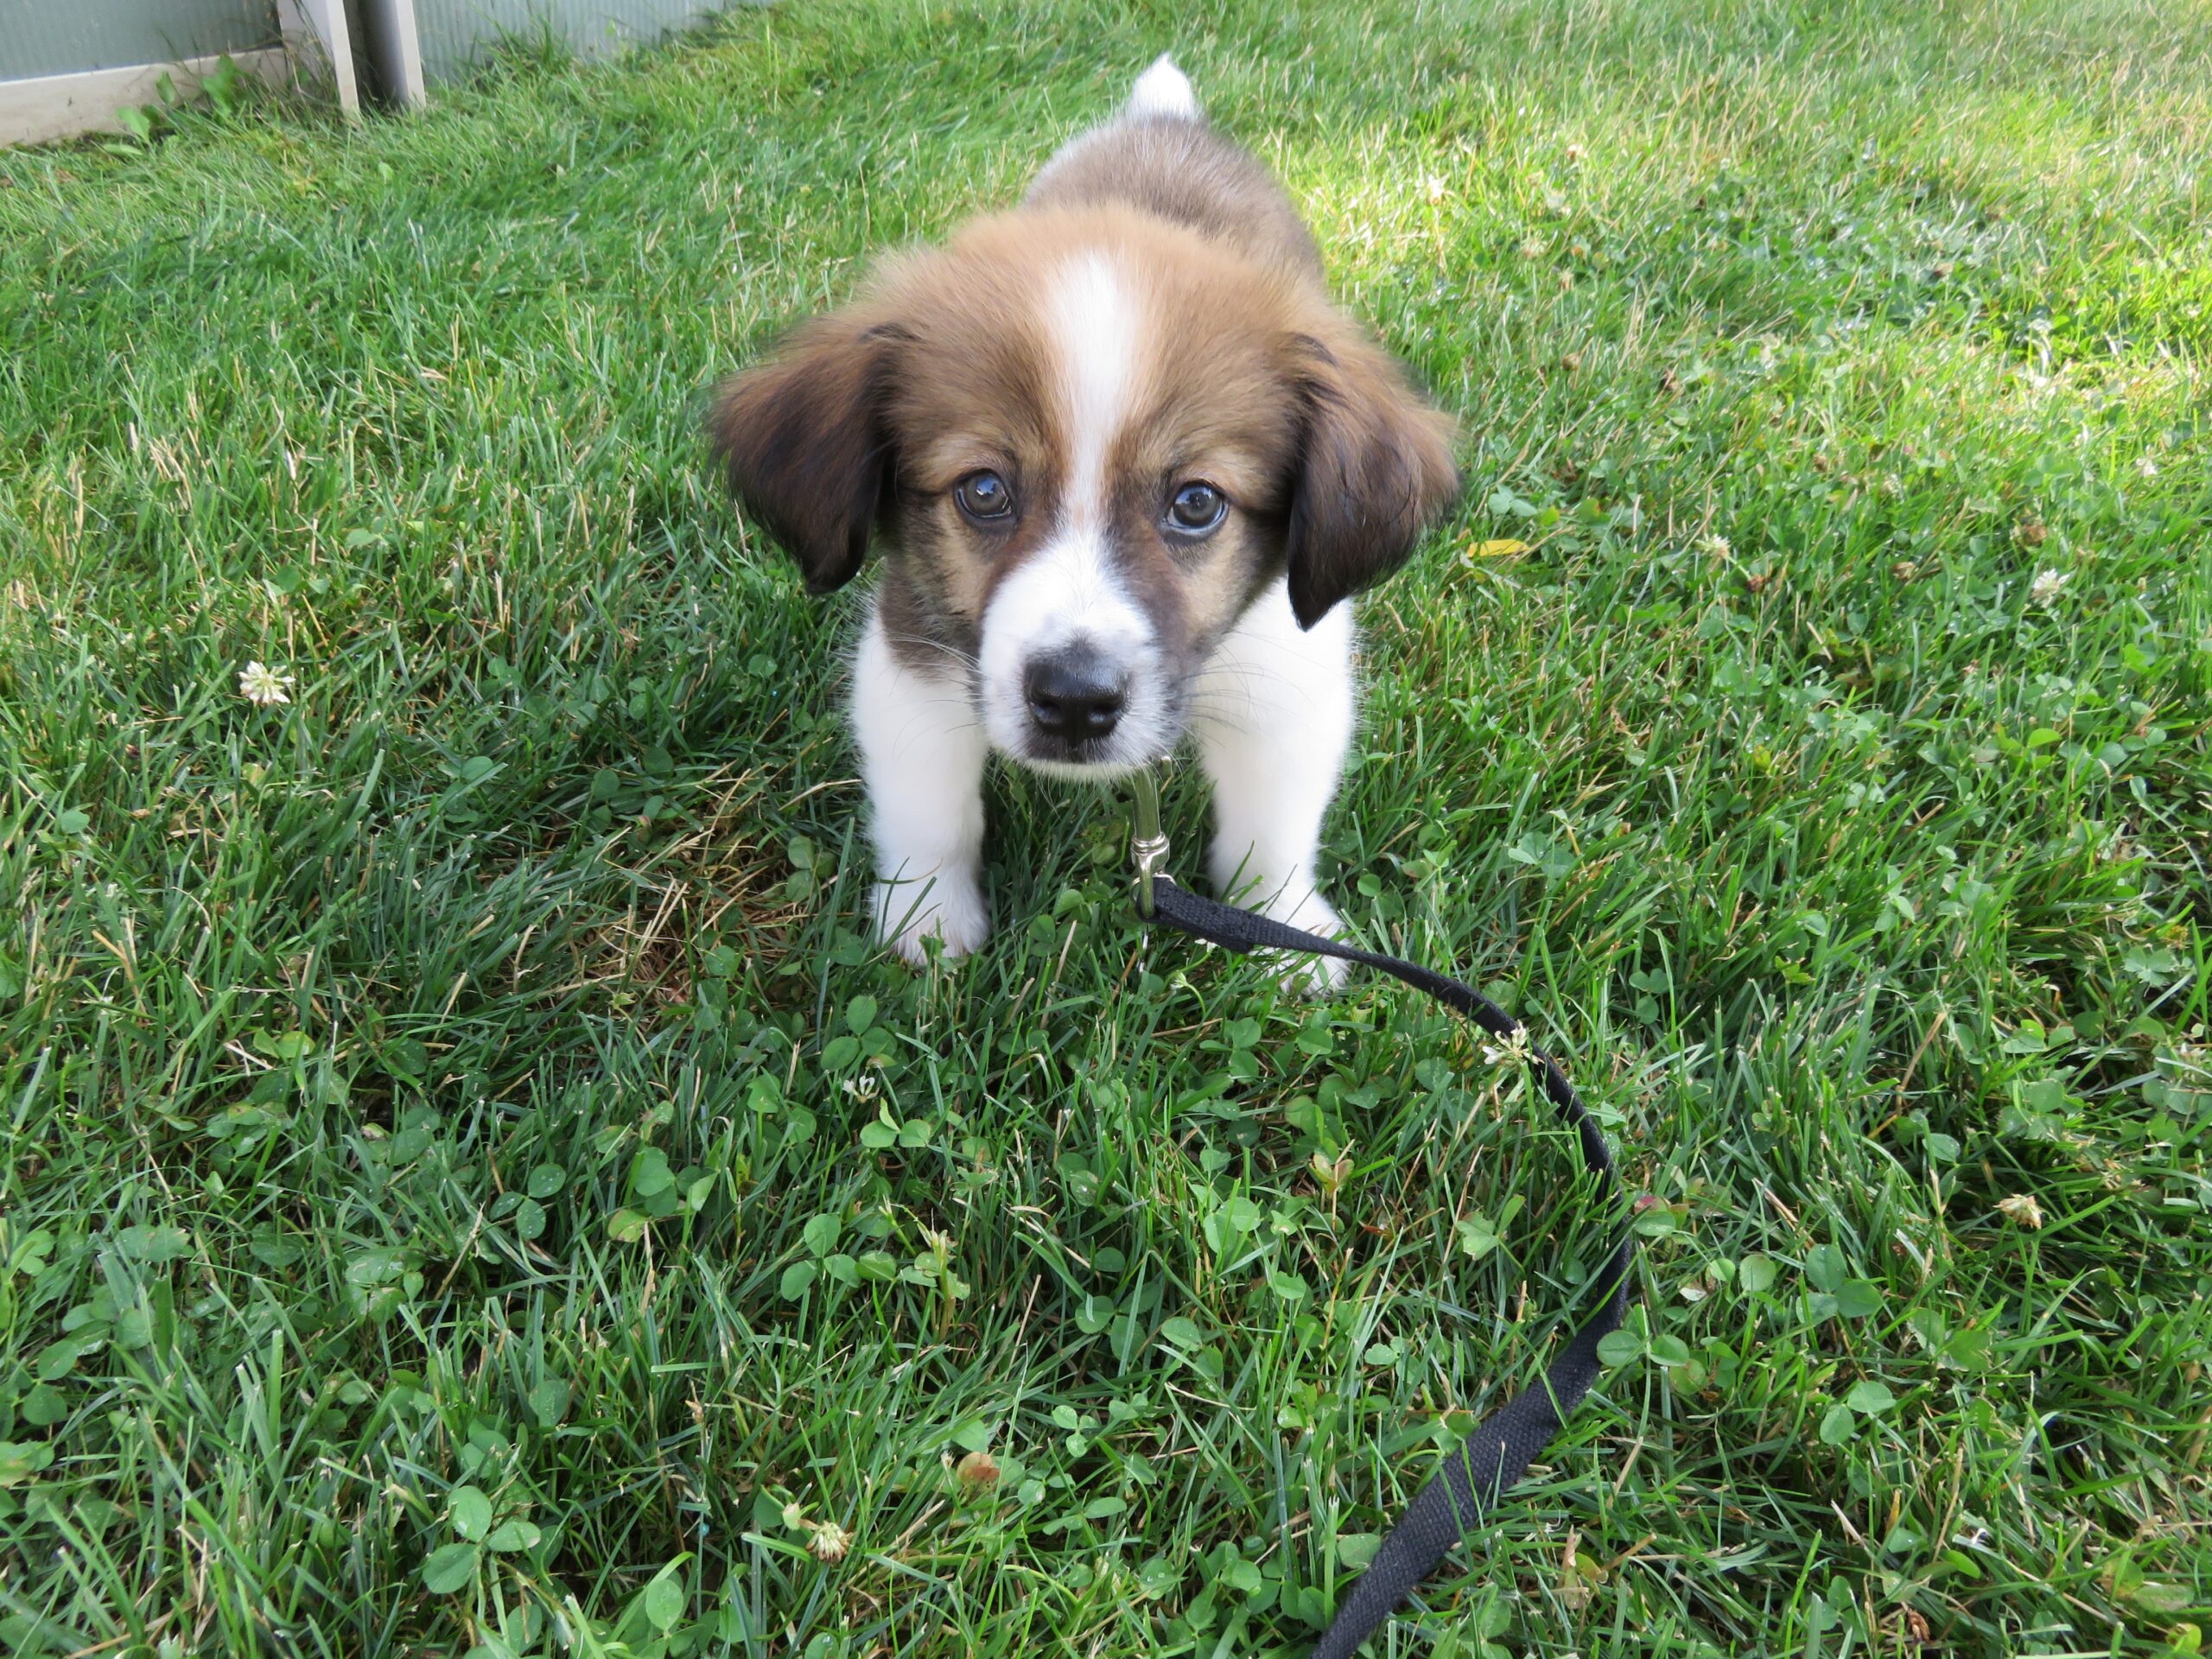 A cute brown and white puppy plays in some grass